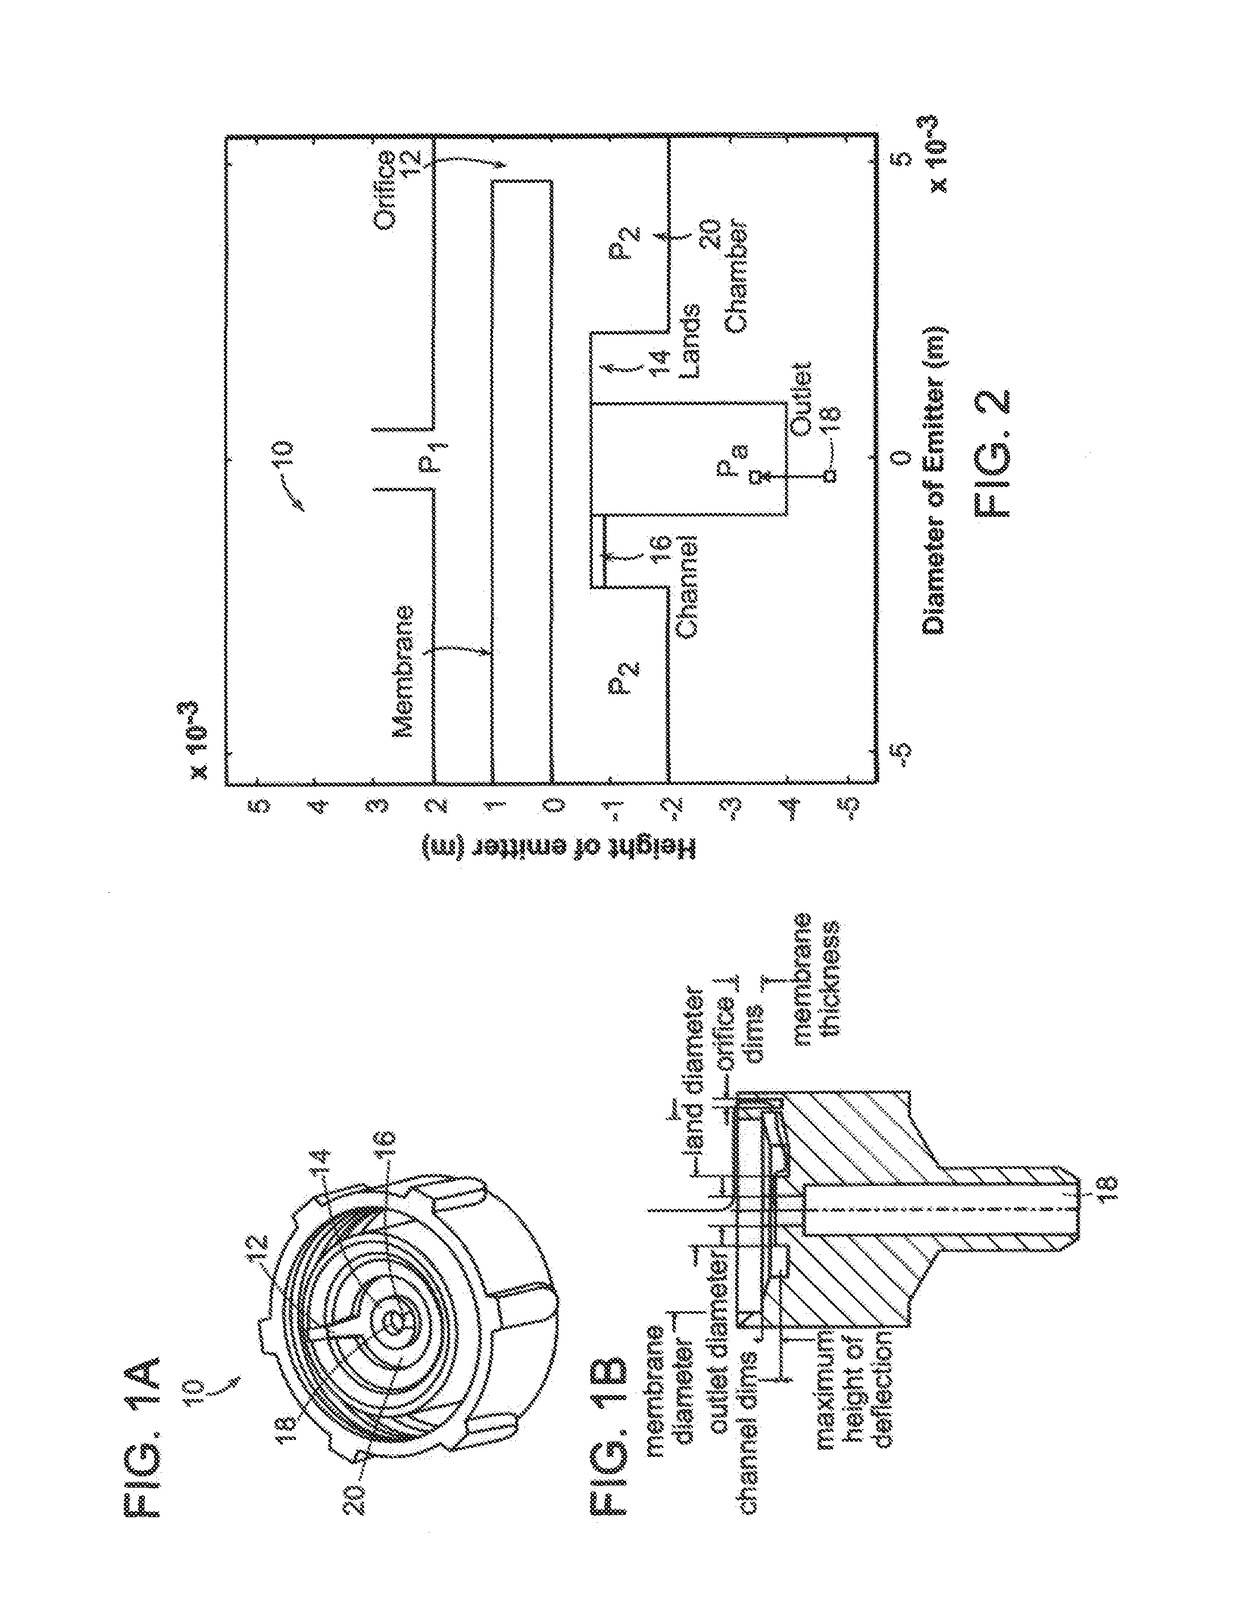 Pressure Compensating Emitter Having Very Low Activation Pressure and Large Operating Range